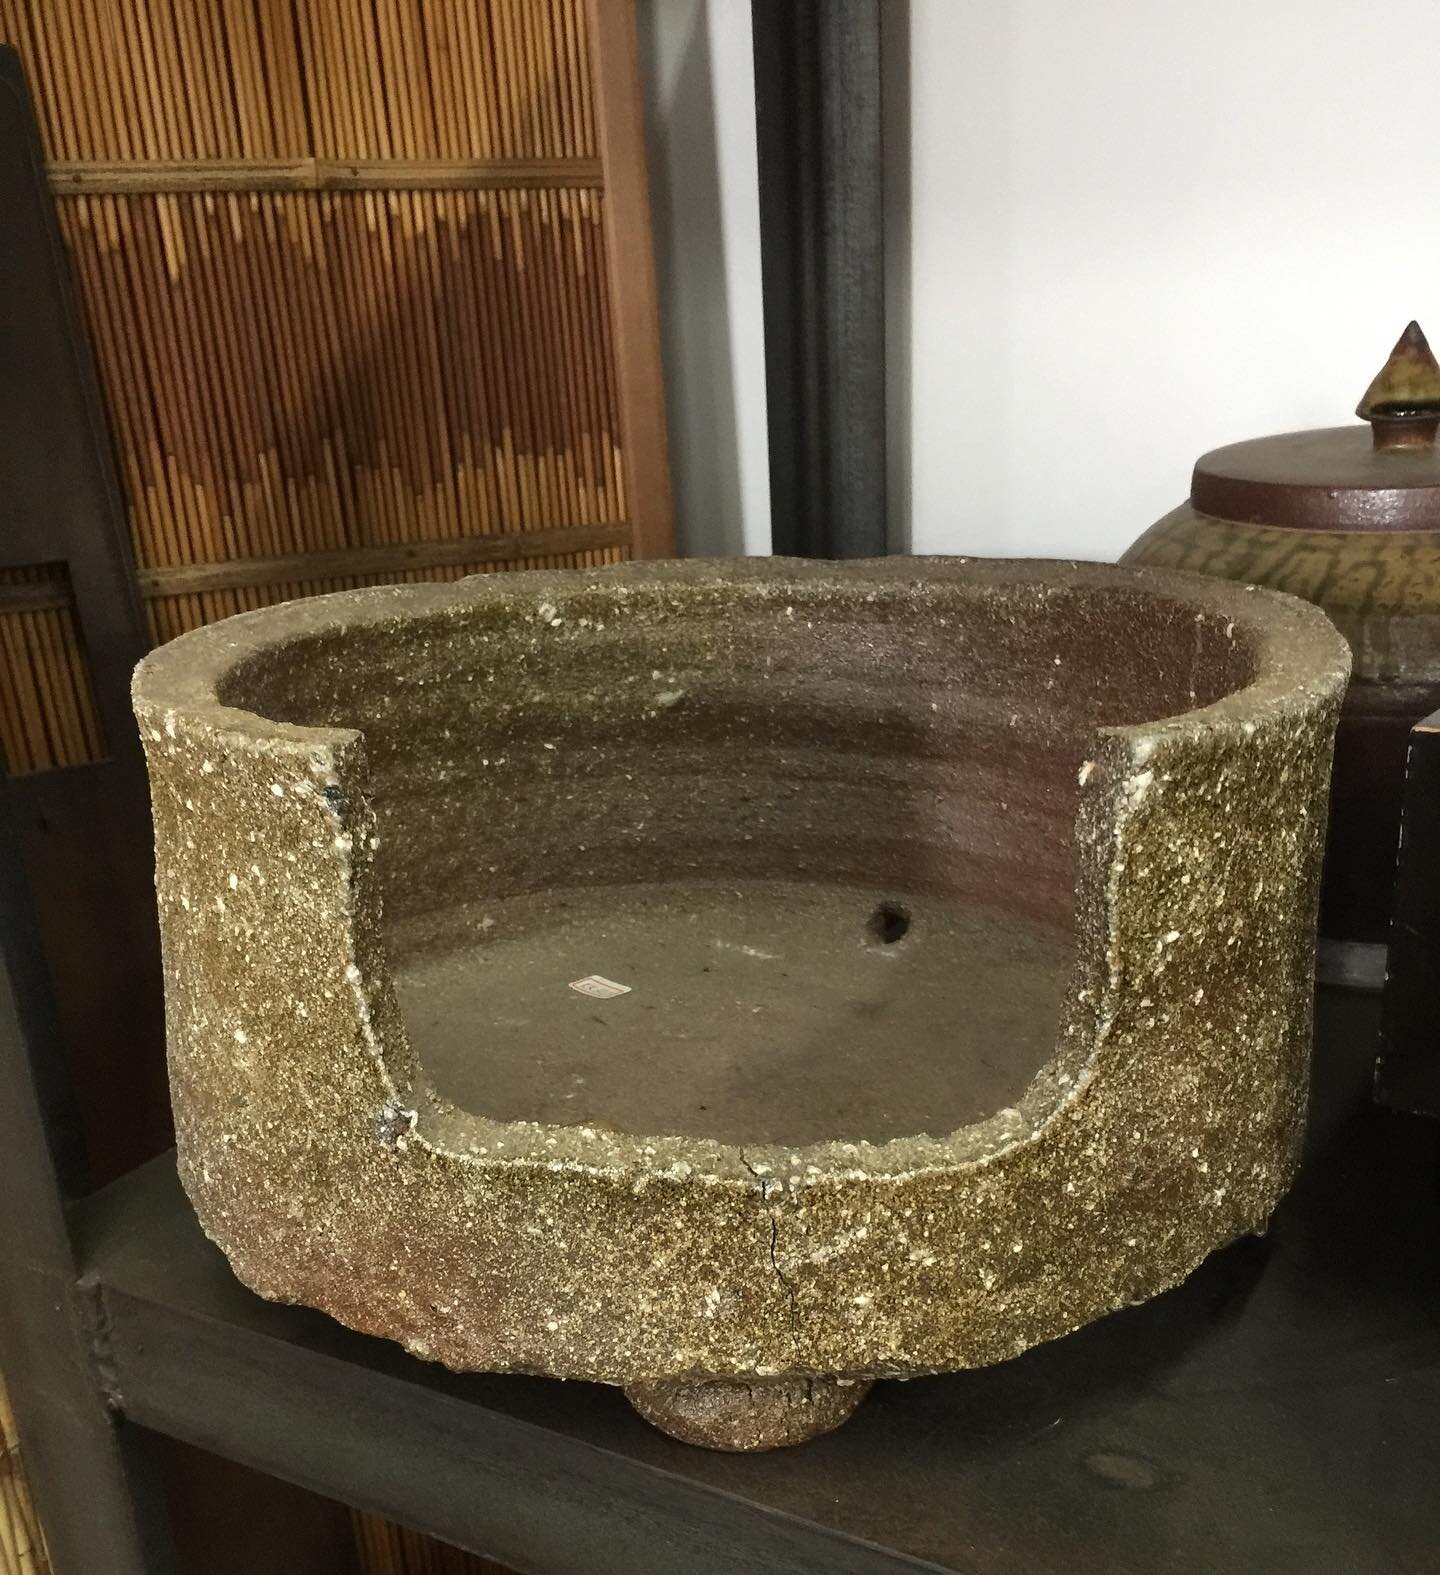 This pot seemed rather lonely in a corner @kazari_ziguzagu warehouse so I made an offer and it&rsquo;s now in the Campulance coming home with us. 
A few cracks to fill with Araldite and bronze dust and then enjoy exploring its possibilities! 
#ridgel